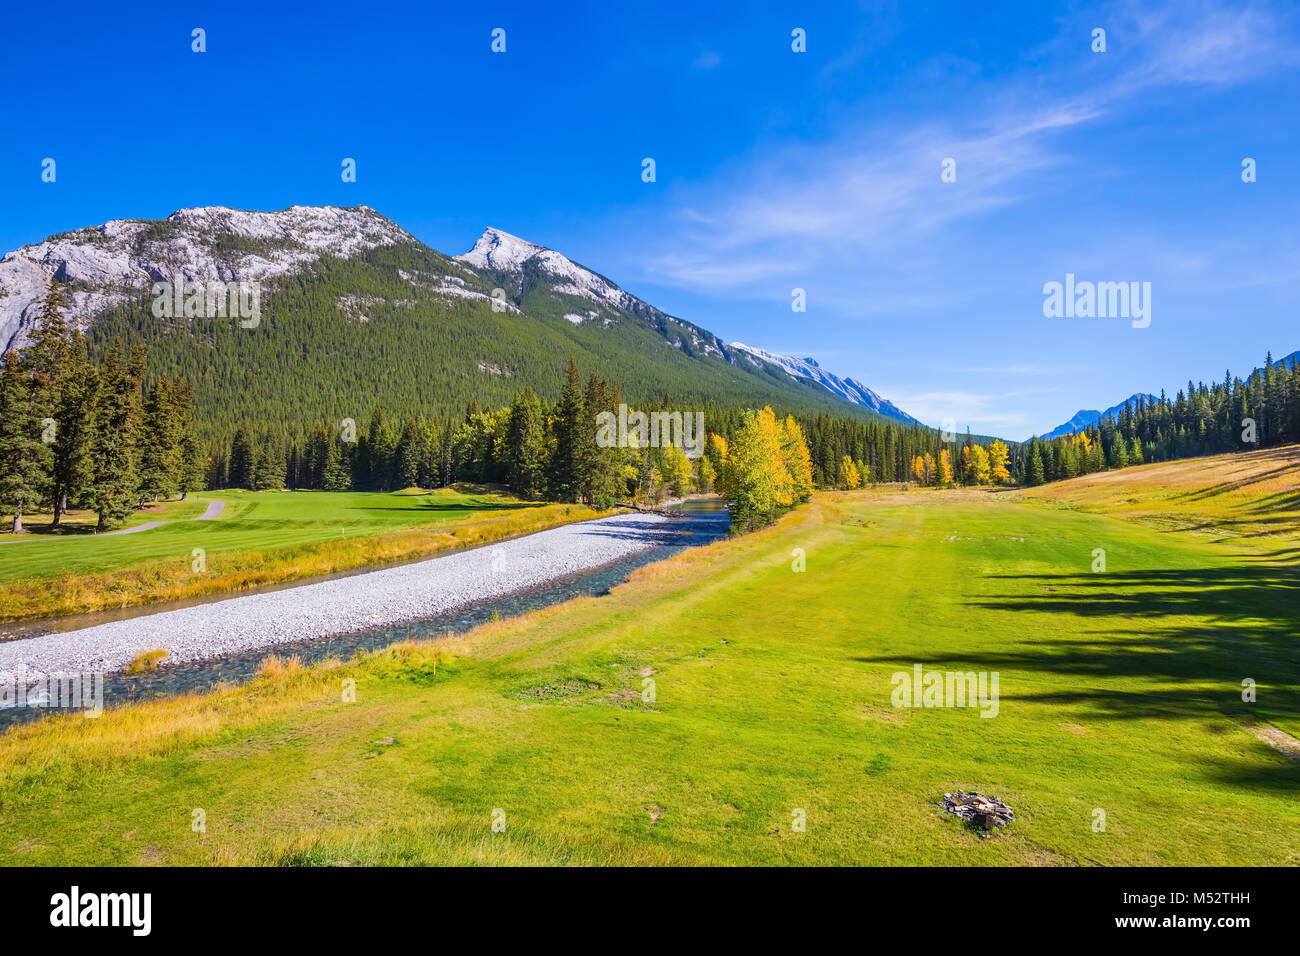 The drying-up stream in Rocky Mountains Stock Photo